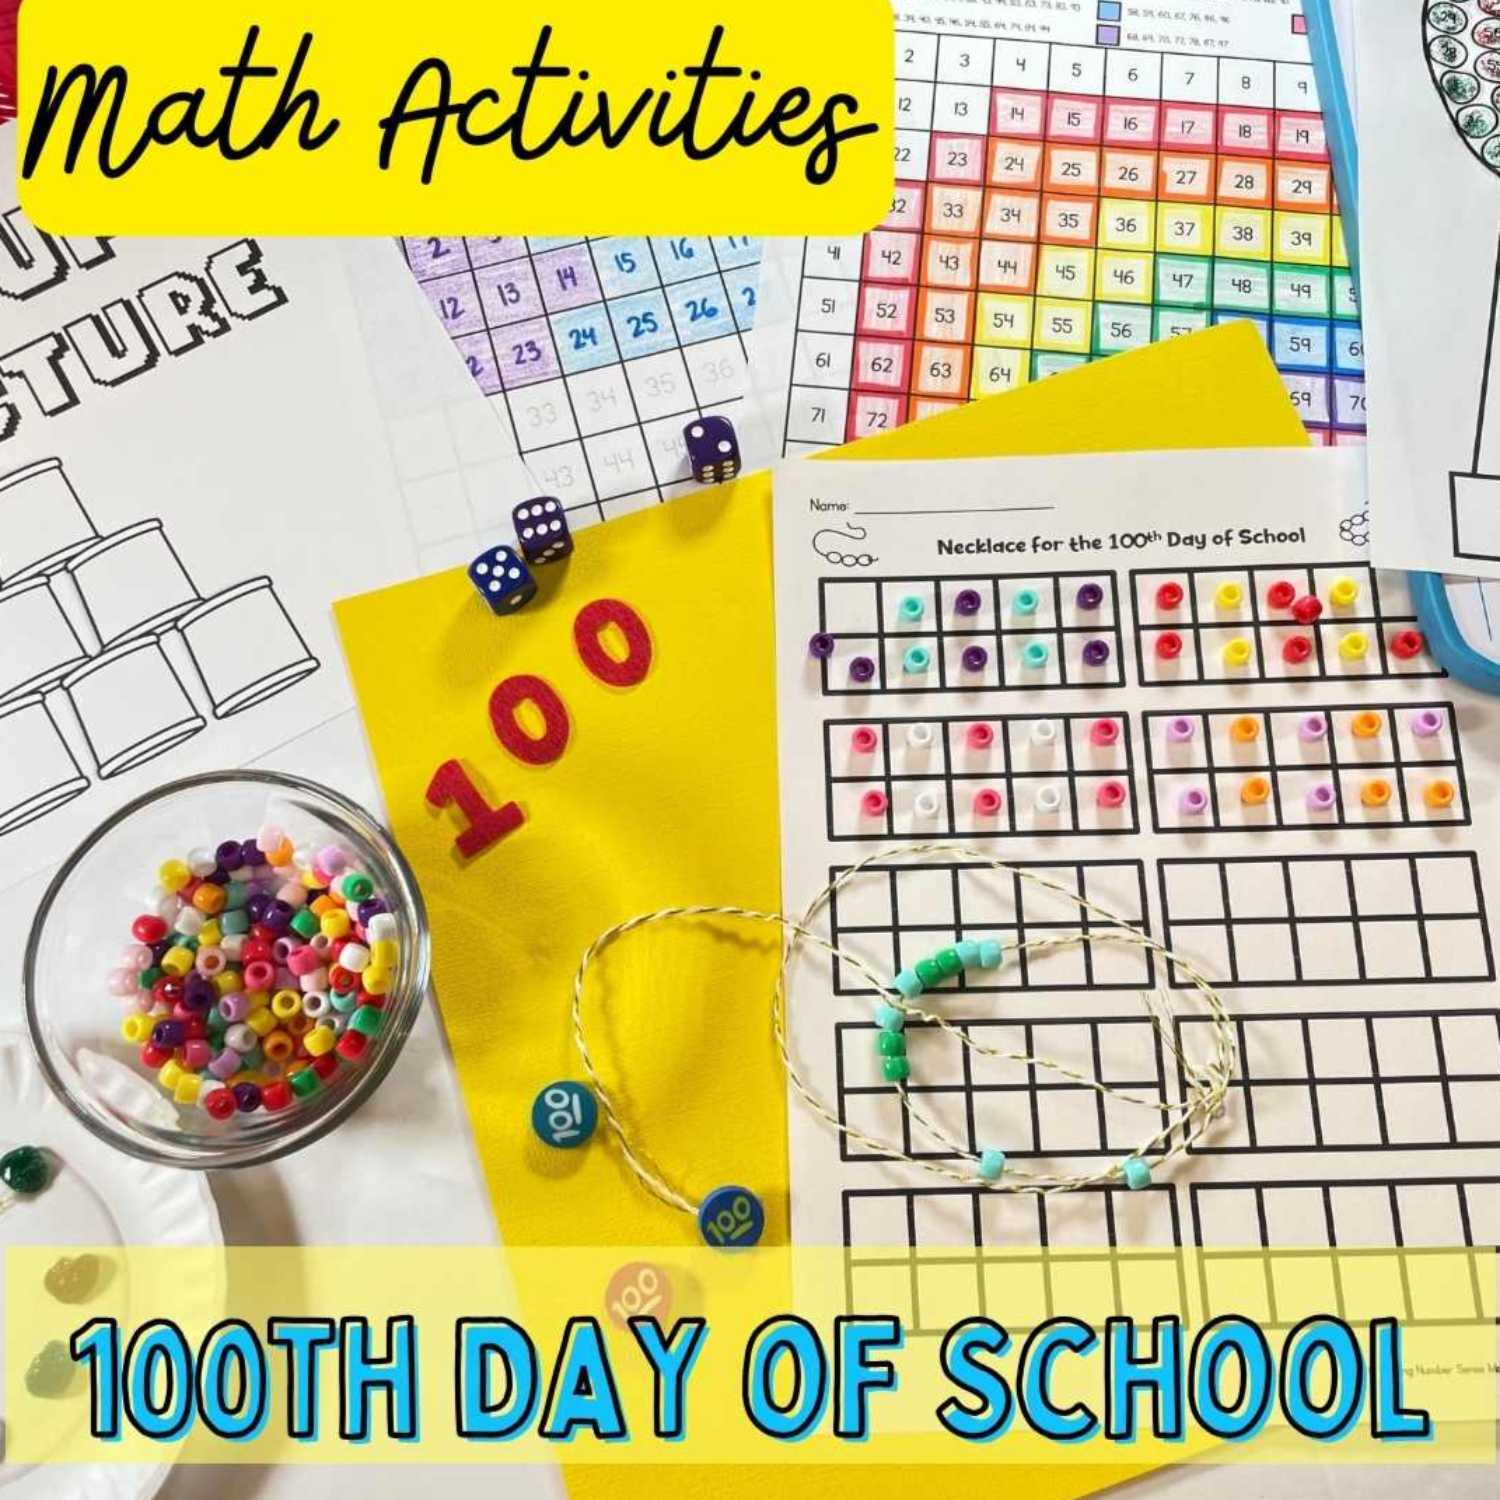 Ep: 28 Math Activities for the 100th Day of School